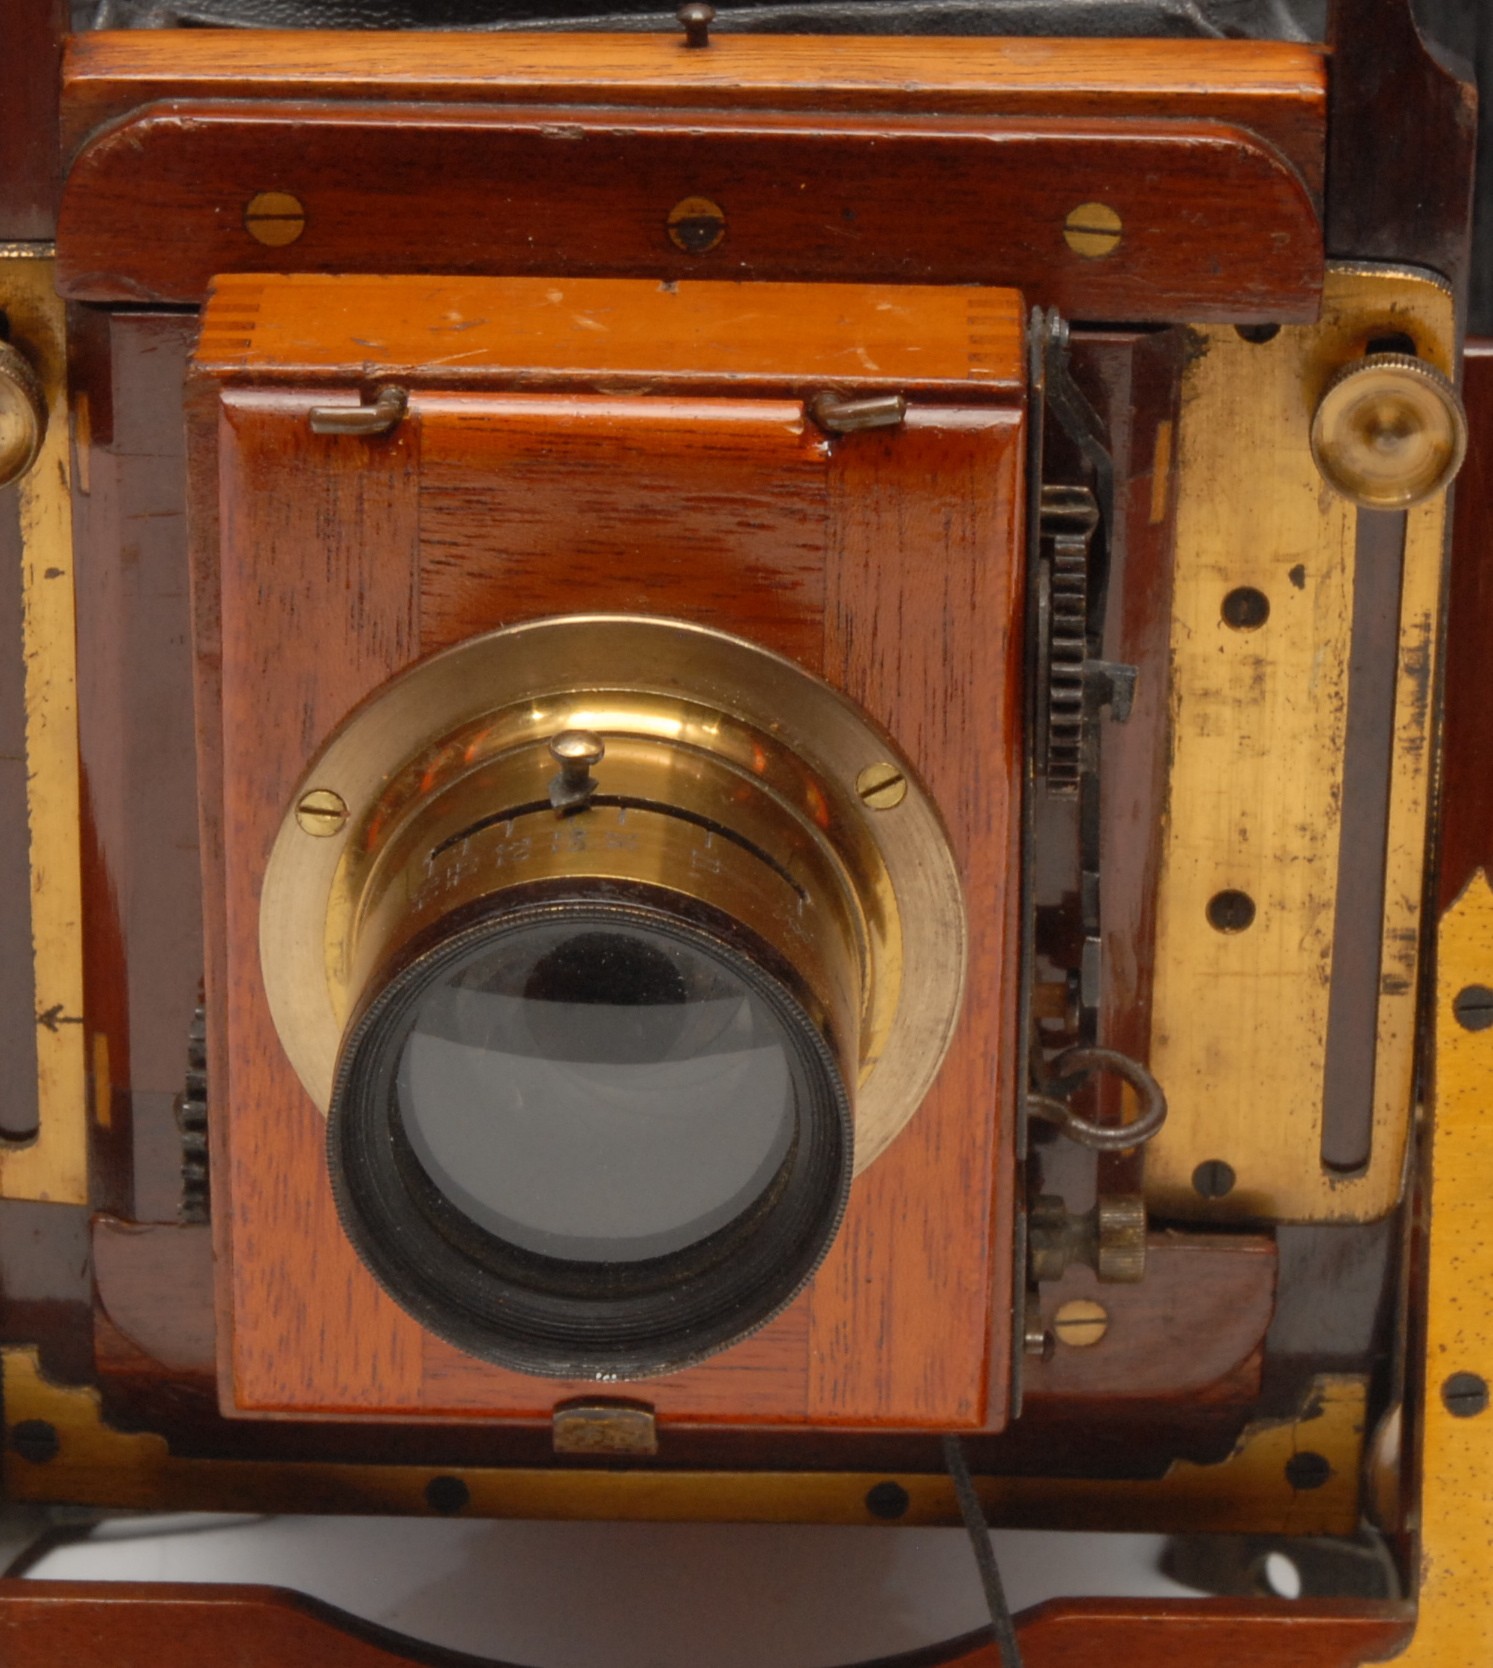 Photography - A W. Butcher & Sons "The National Camera", half-plate folding camera, mahogany body, - Image 3 of 6